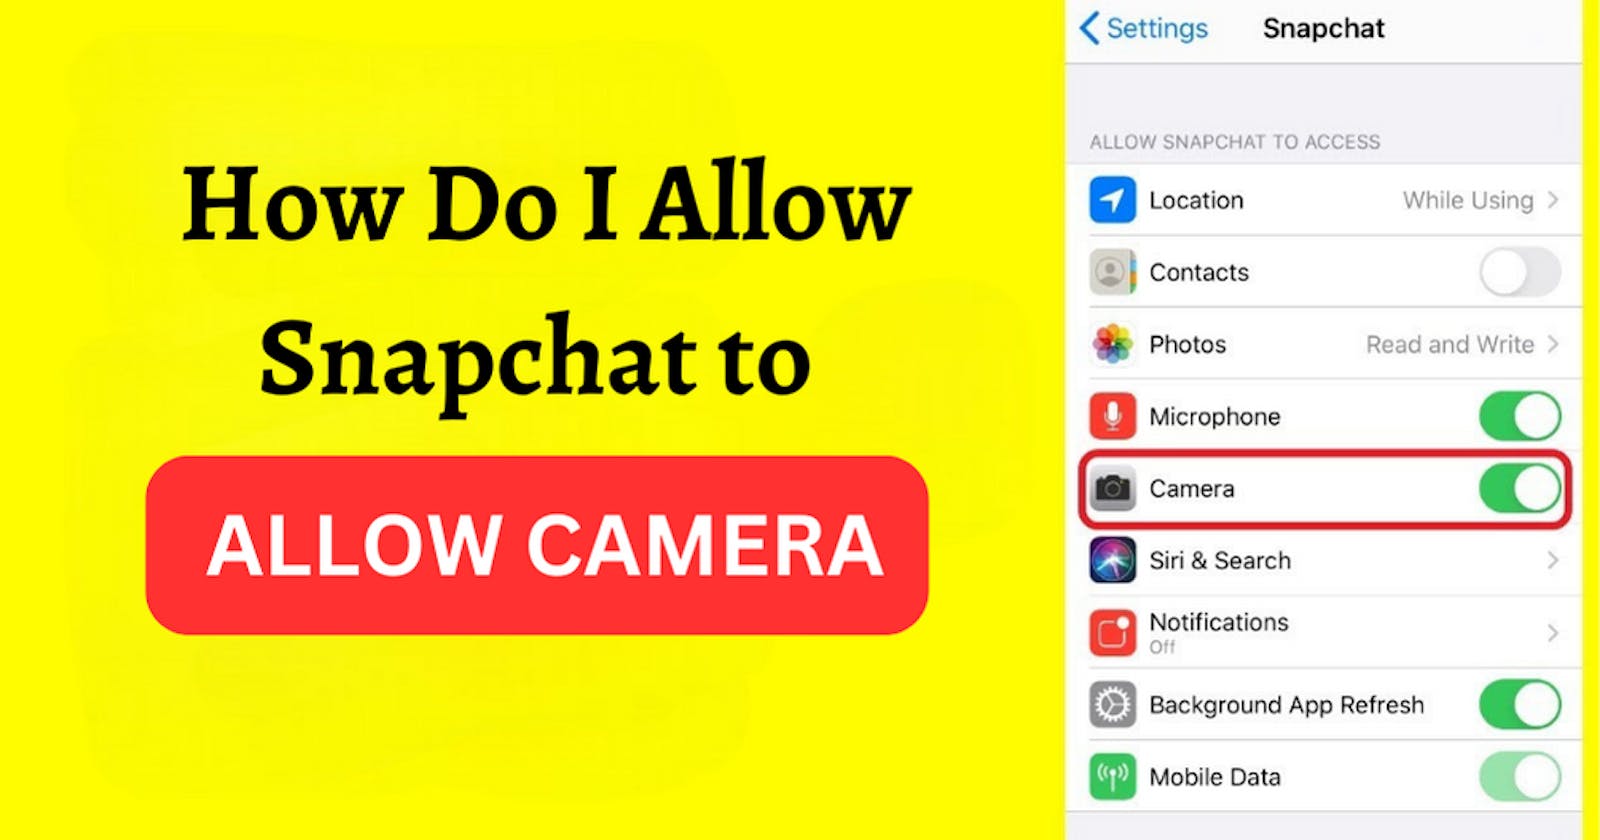 How Do I Allow Snapchat to Allow Camera?